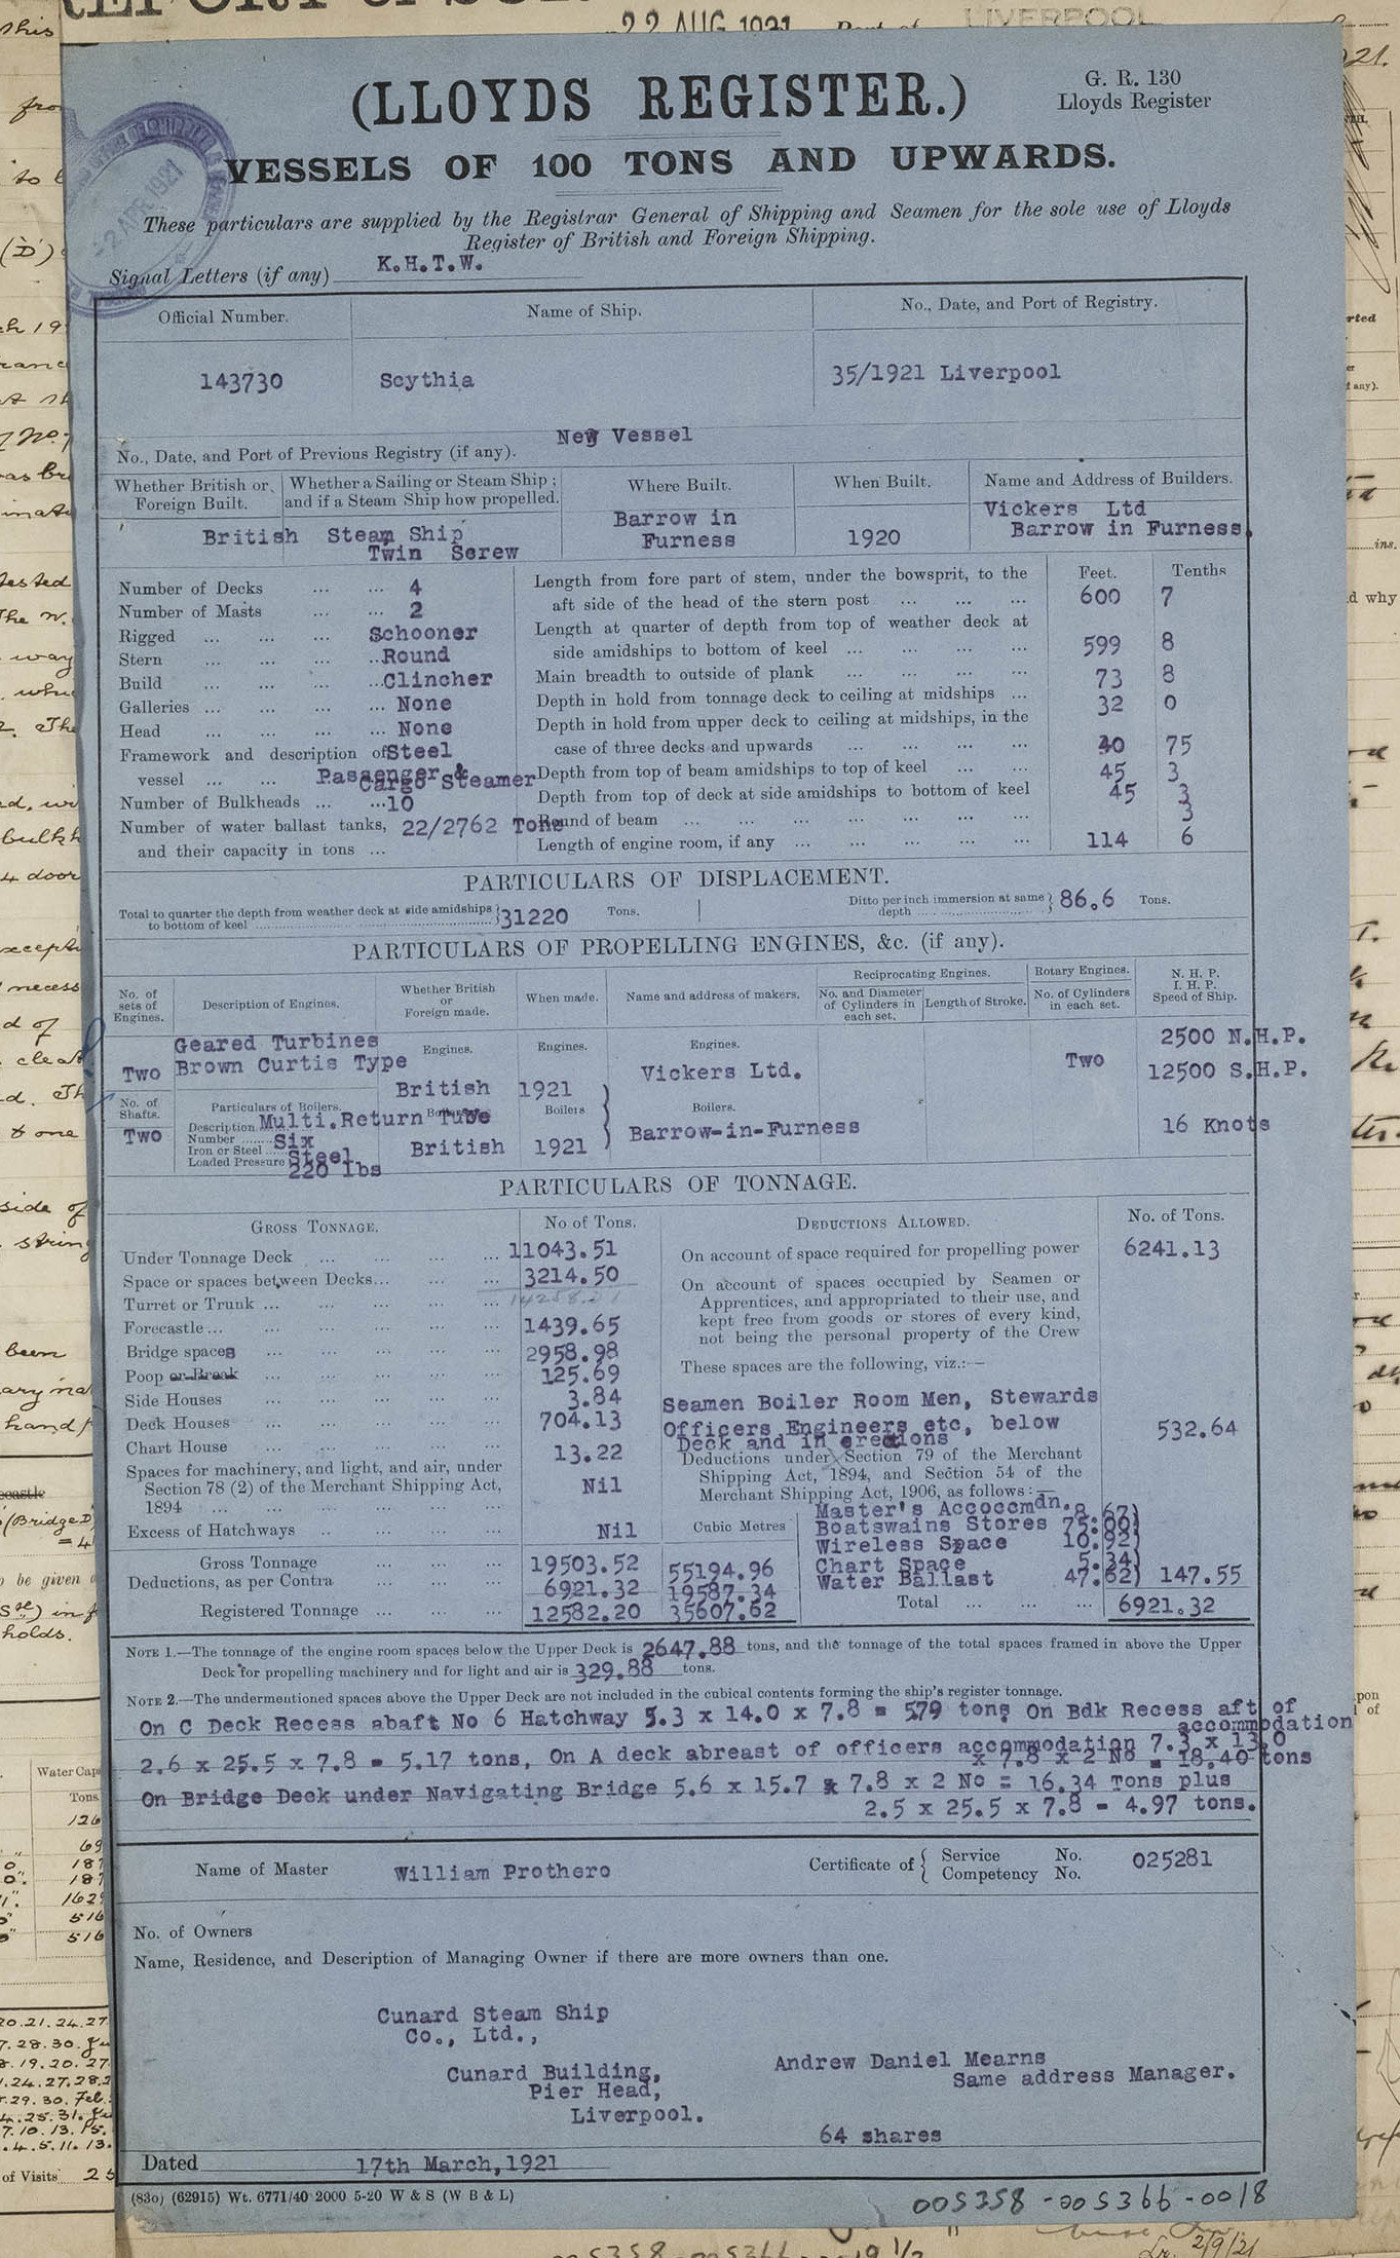 Form for Vessels of 100 Tons & Upwards for Scythia, 17th March 1921  